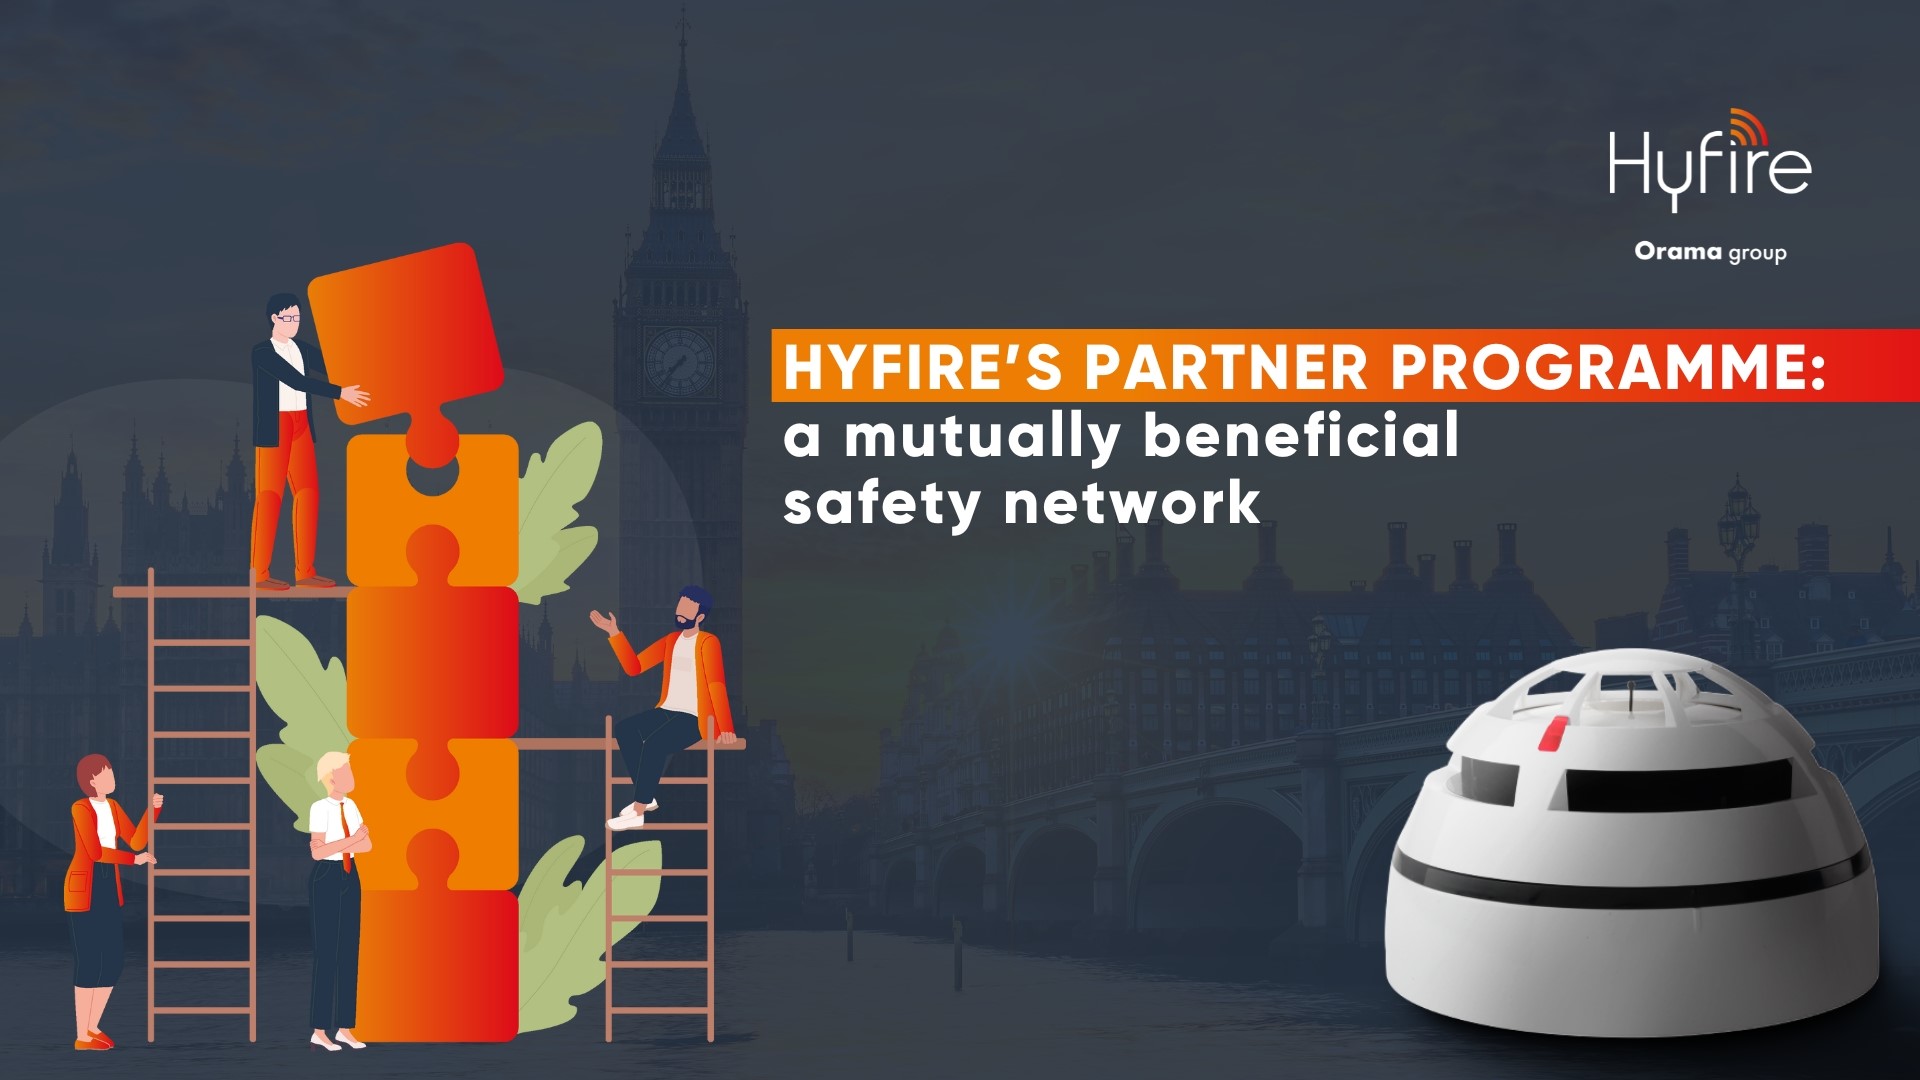 Hyfire’s Partner Programme: a mutually beneficial safety network